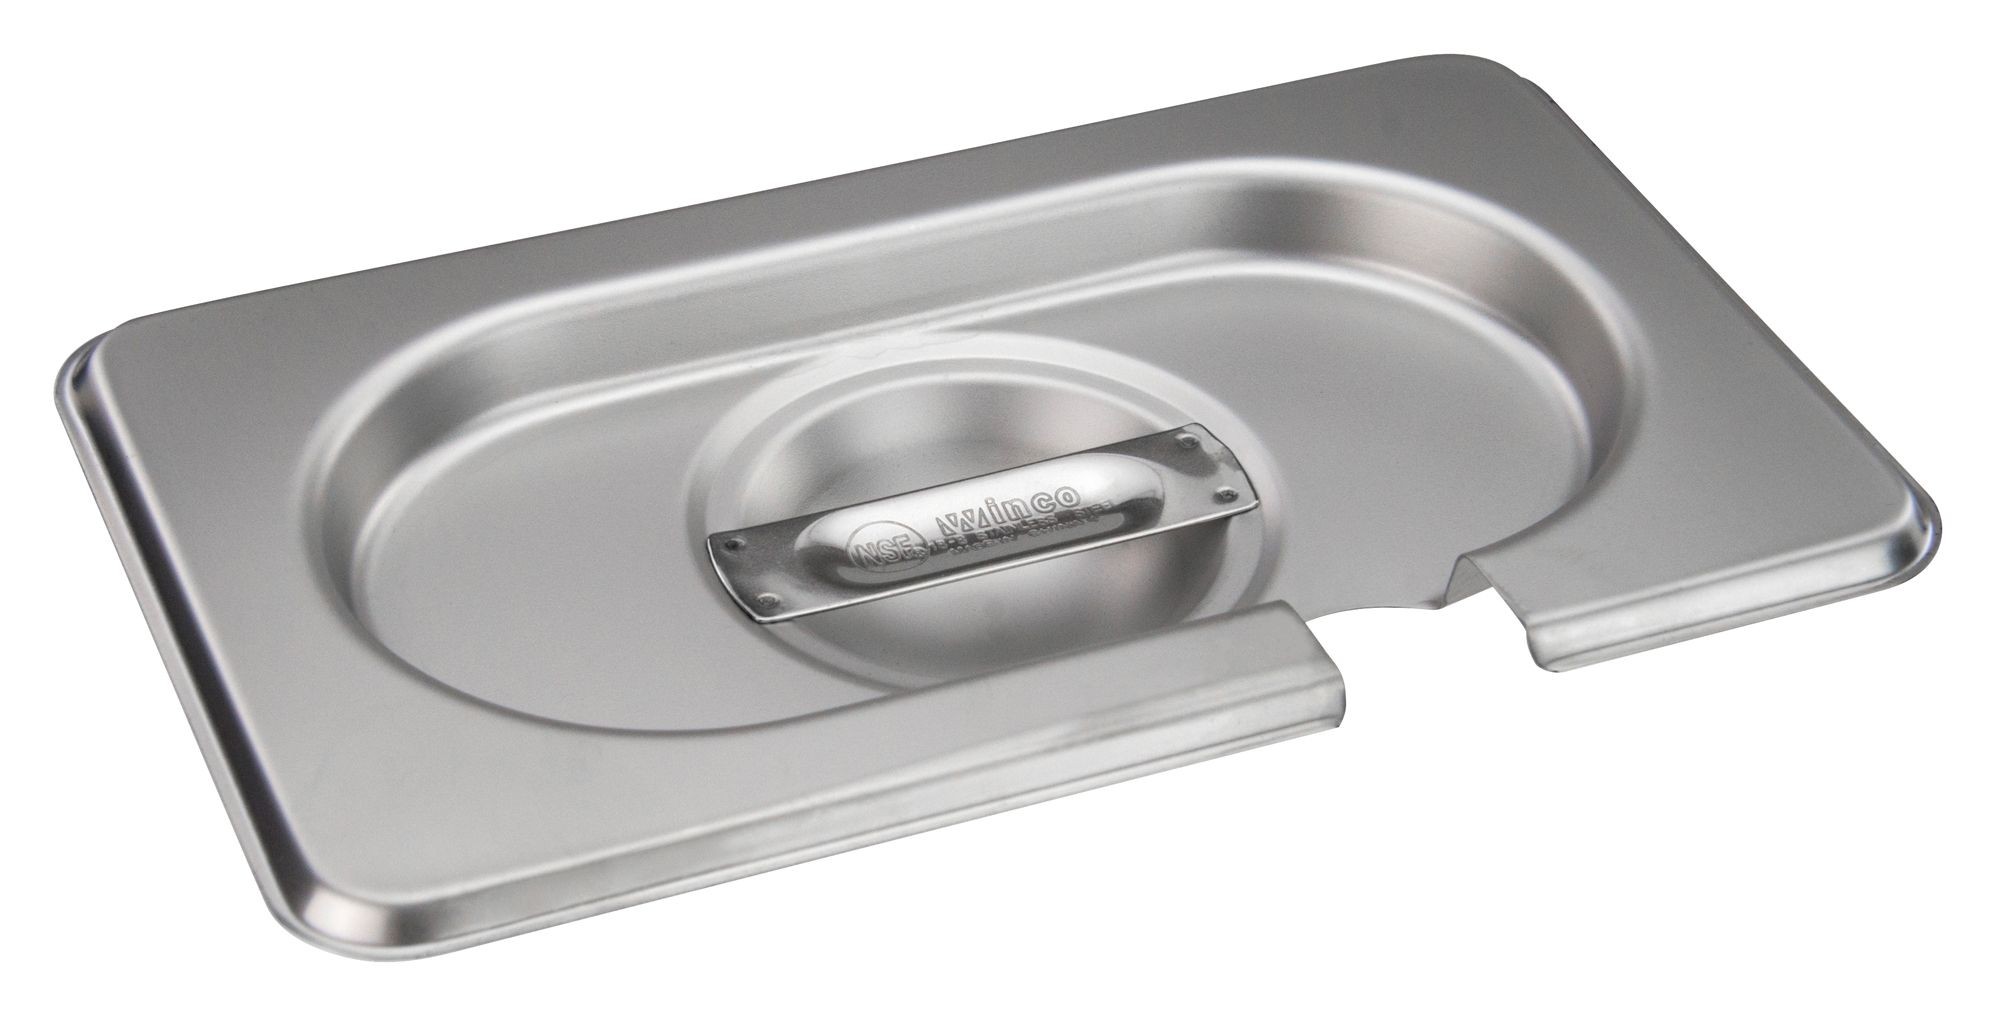 Winco SPCN-GN Solid Stainless Steel Steam Pan Cover for SPJH-906G/N